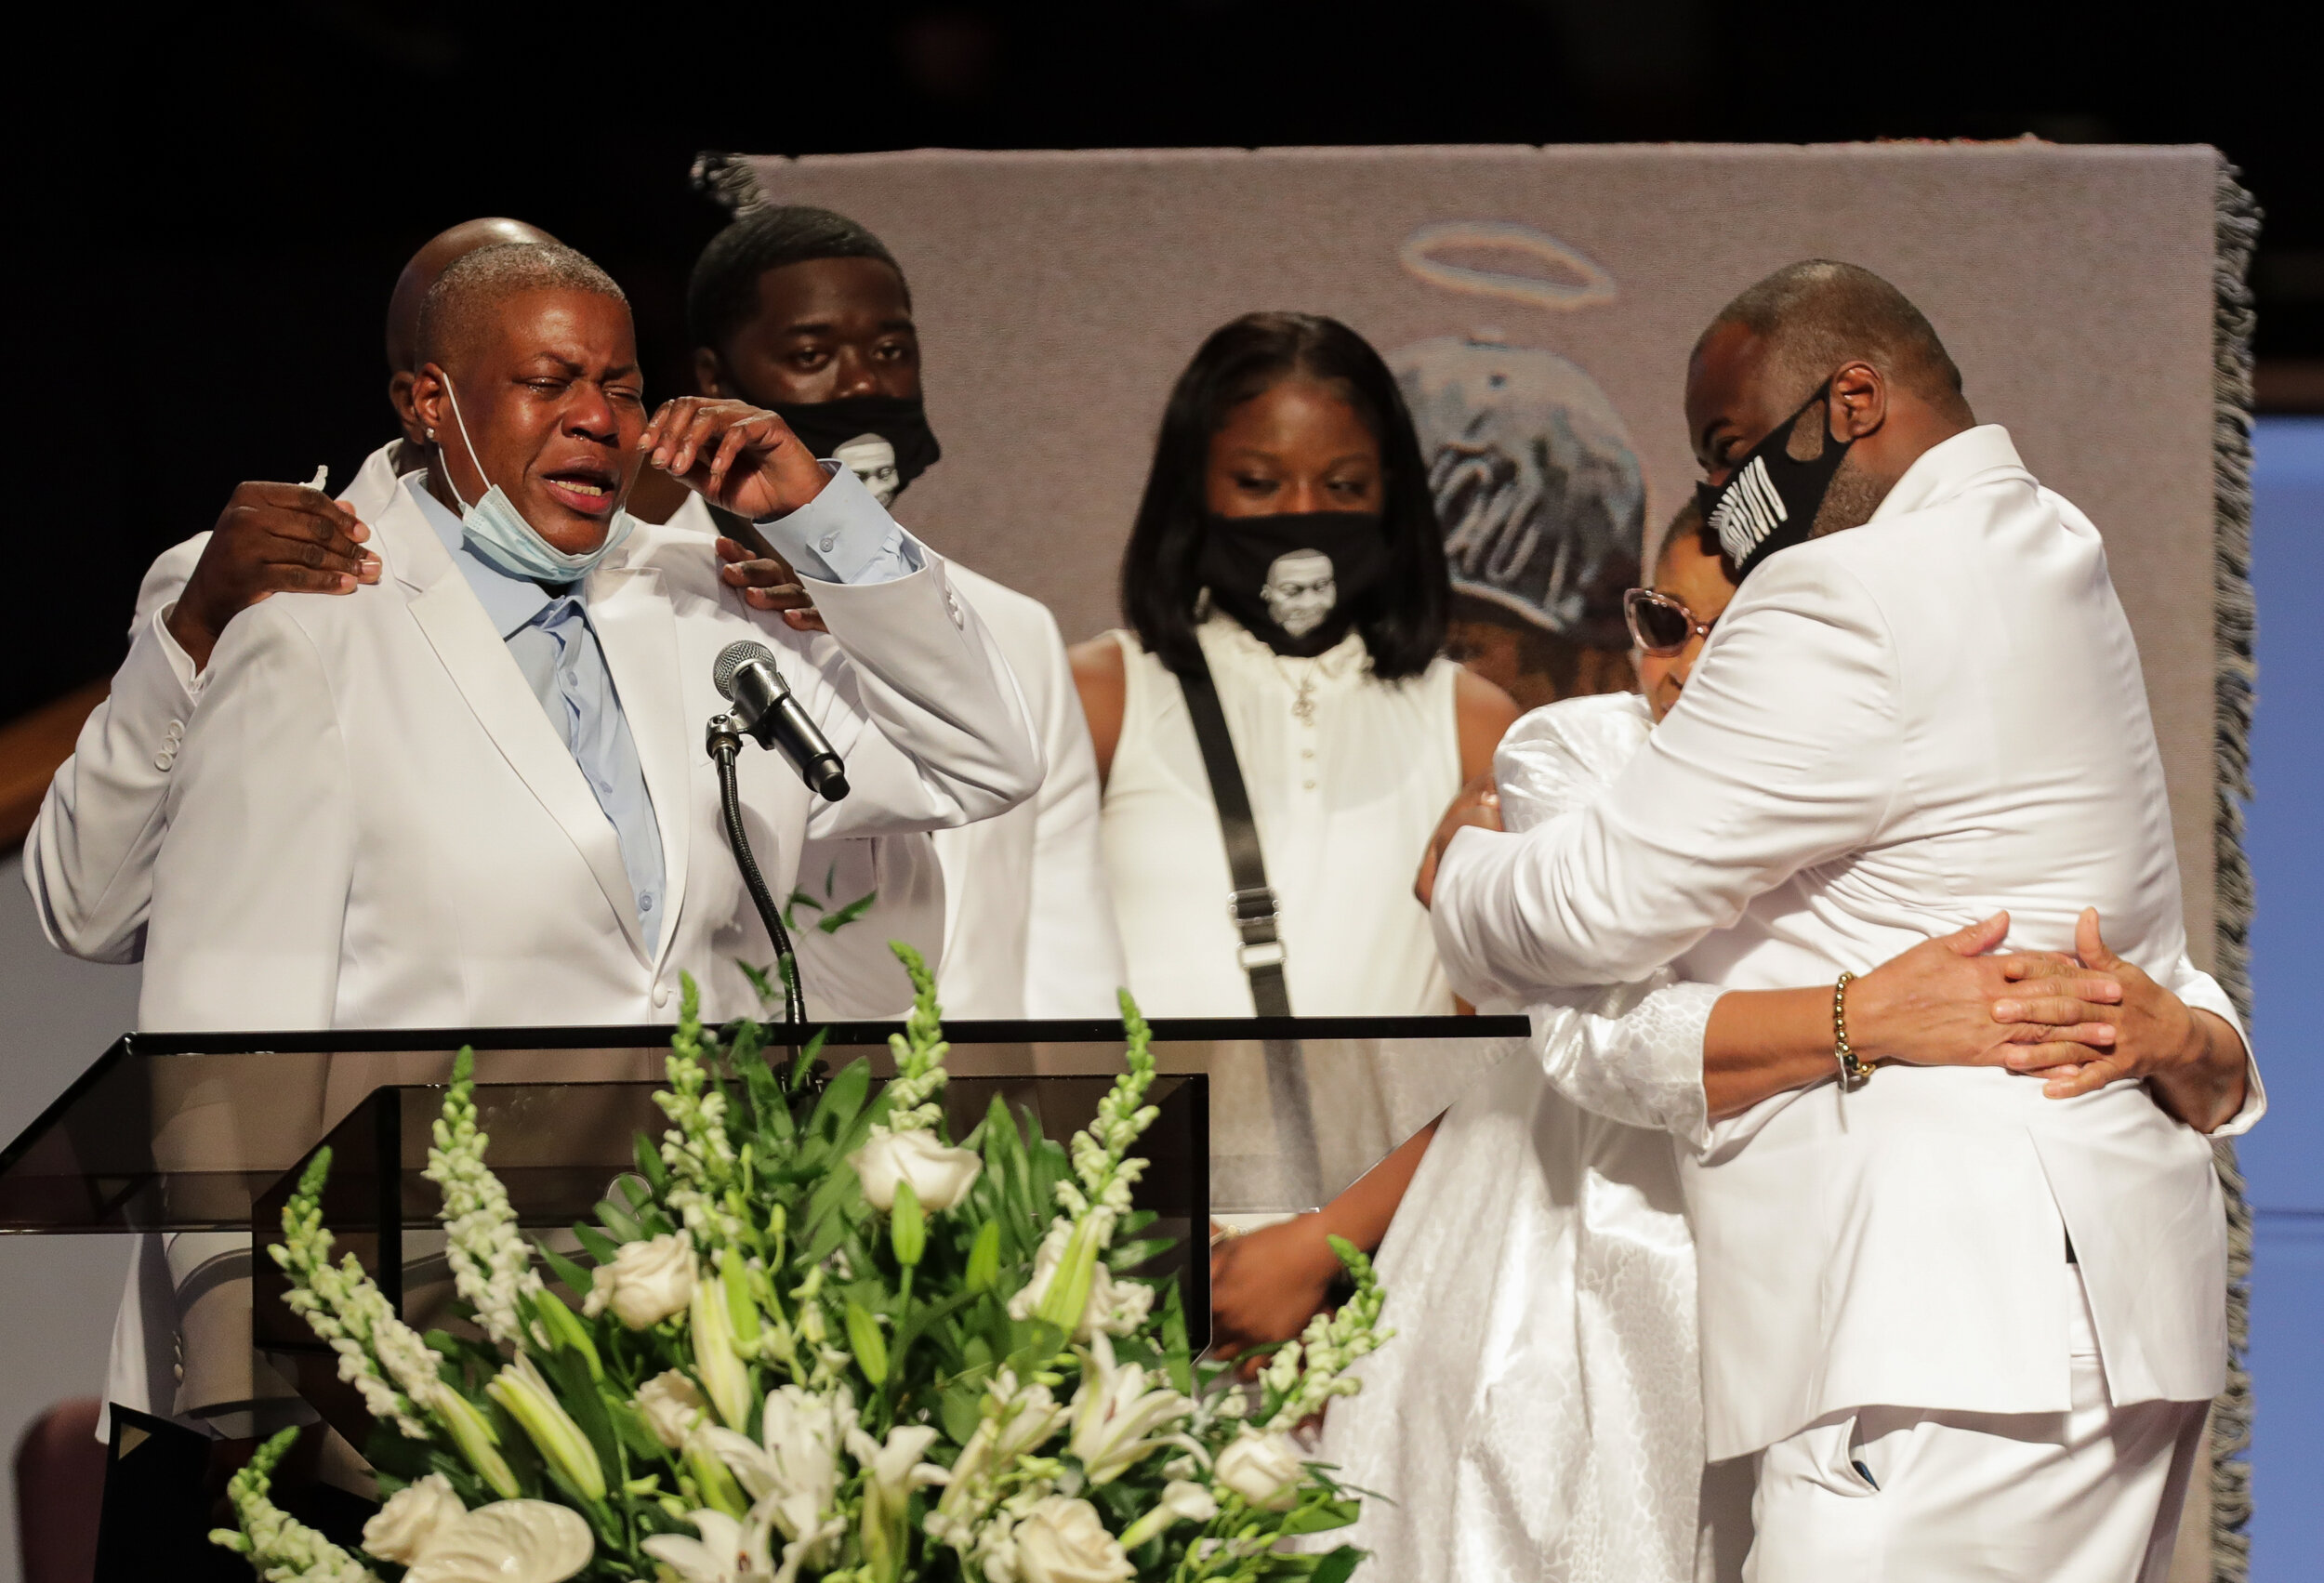  LaTonya Floyd, left, speaks during the funeral for her brother, George Floyd, at The Fountain of Praise church on Tuesday, June 9, 2020, in Houston, Texas. Floyd died while in custody of the Minneapolis Police Department, after officer Derek Chauvin